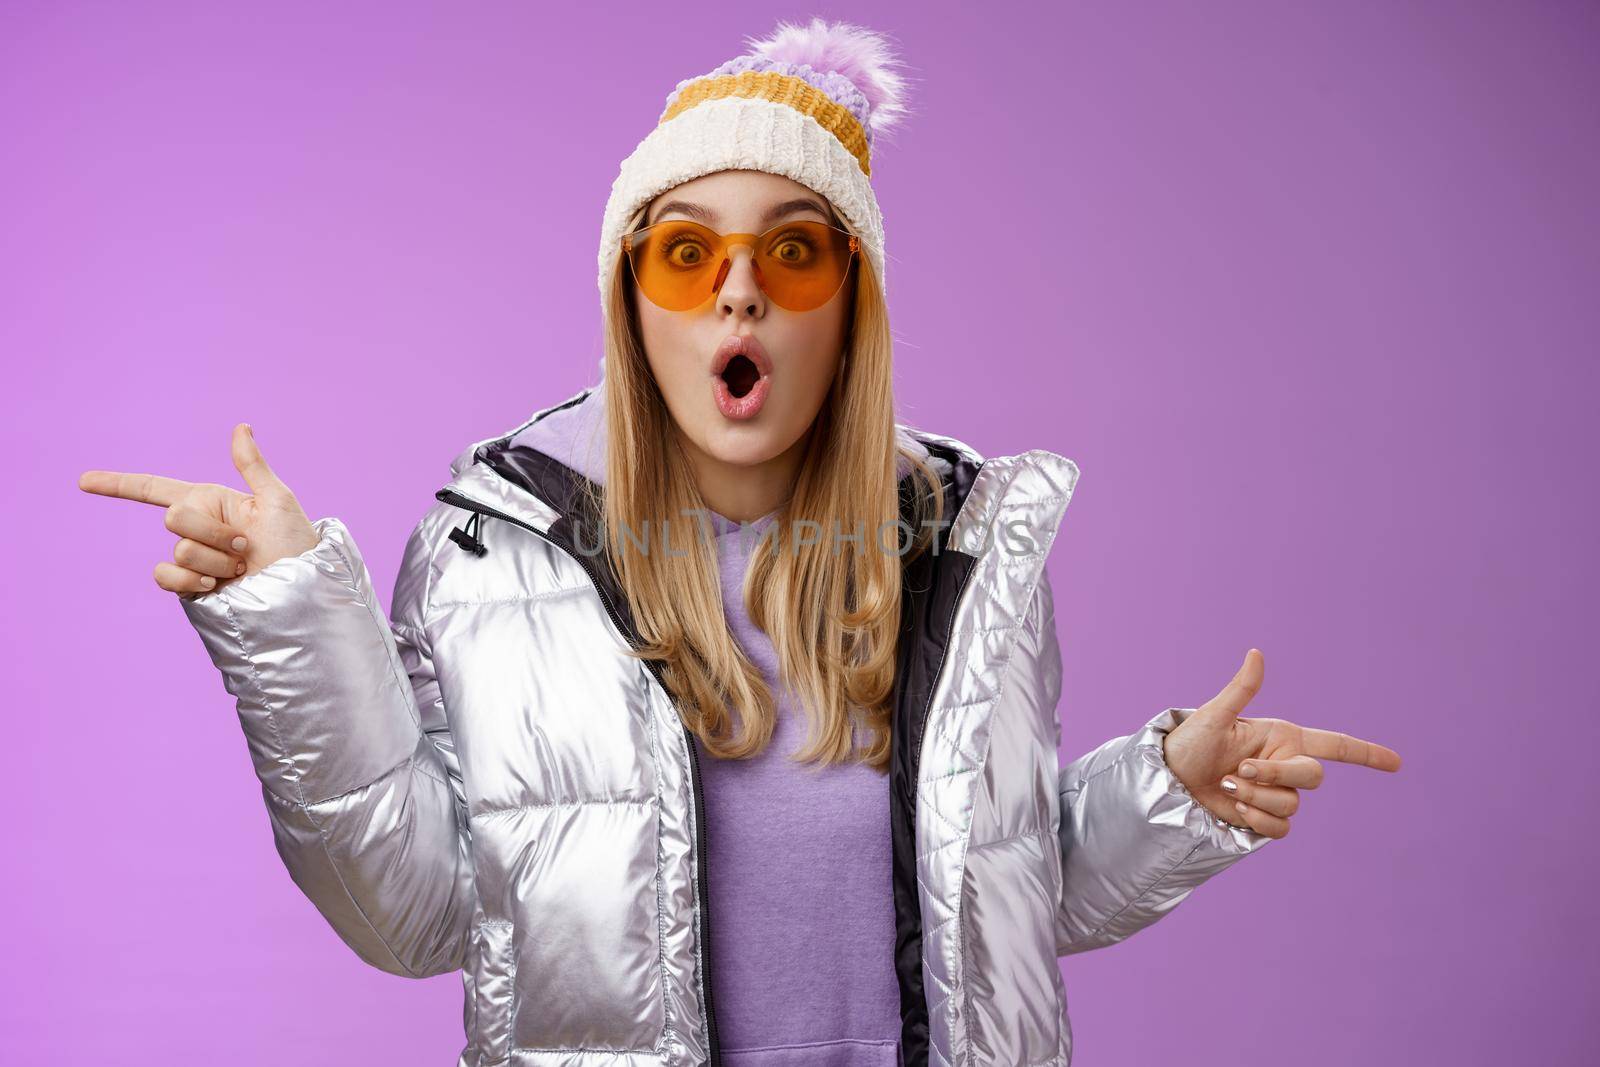 Impressed blond girl gasping widen eyes surprised folding lips wow sound check out incredible discounts winter equipment pointing left right cannot choose standing astonished purple background.